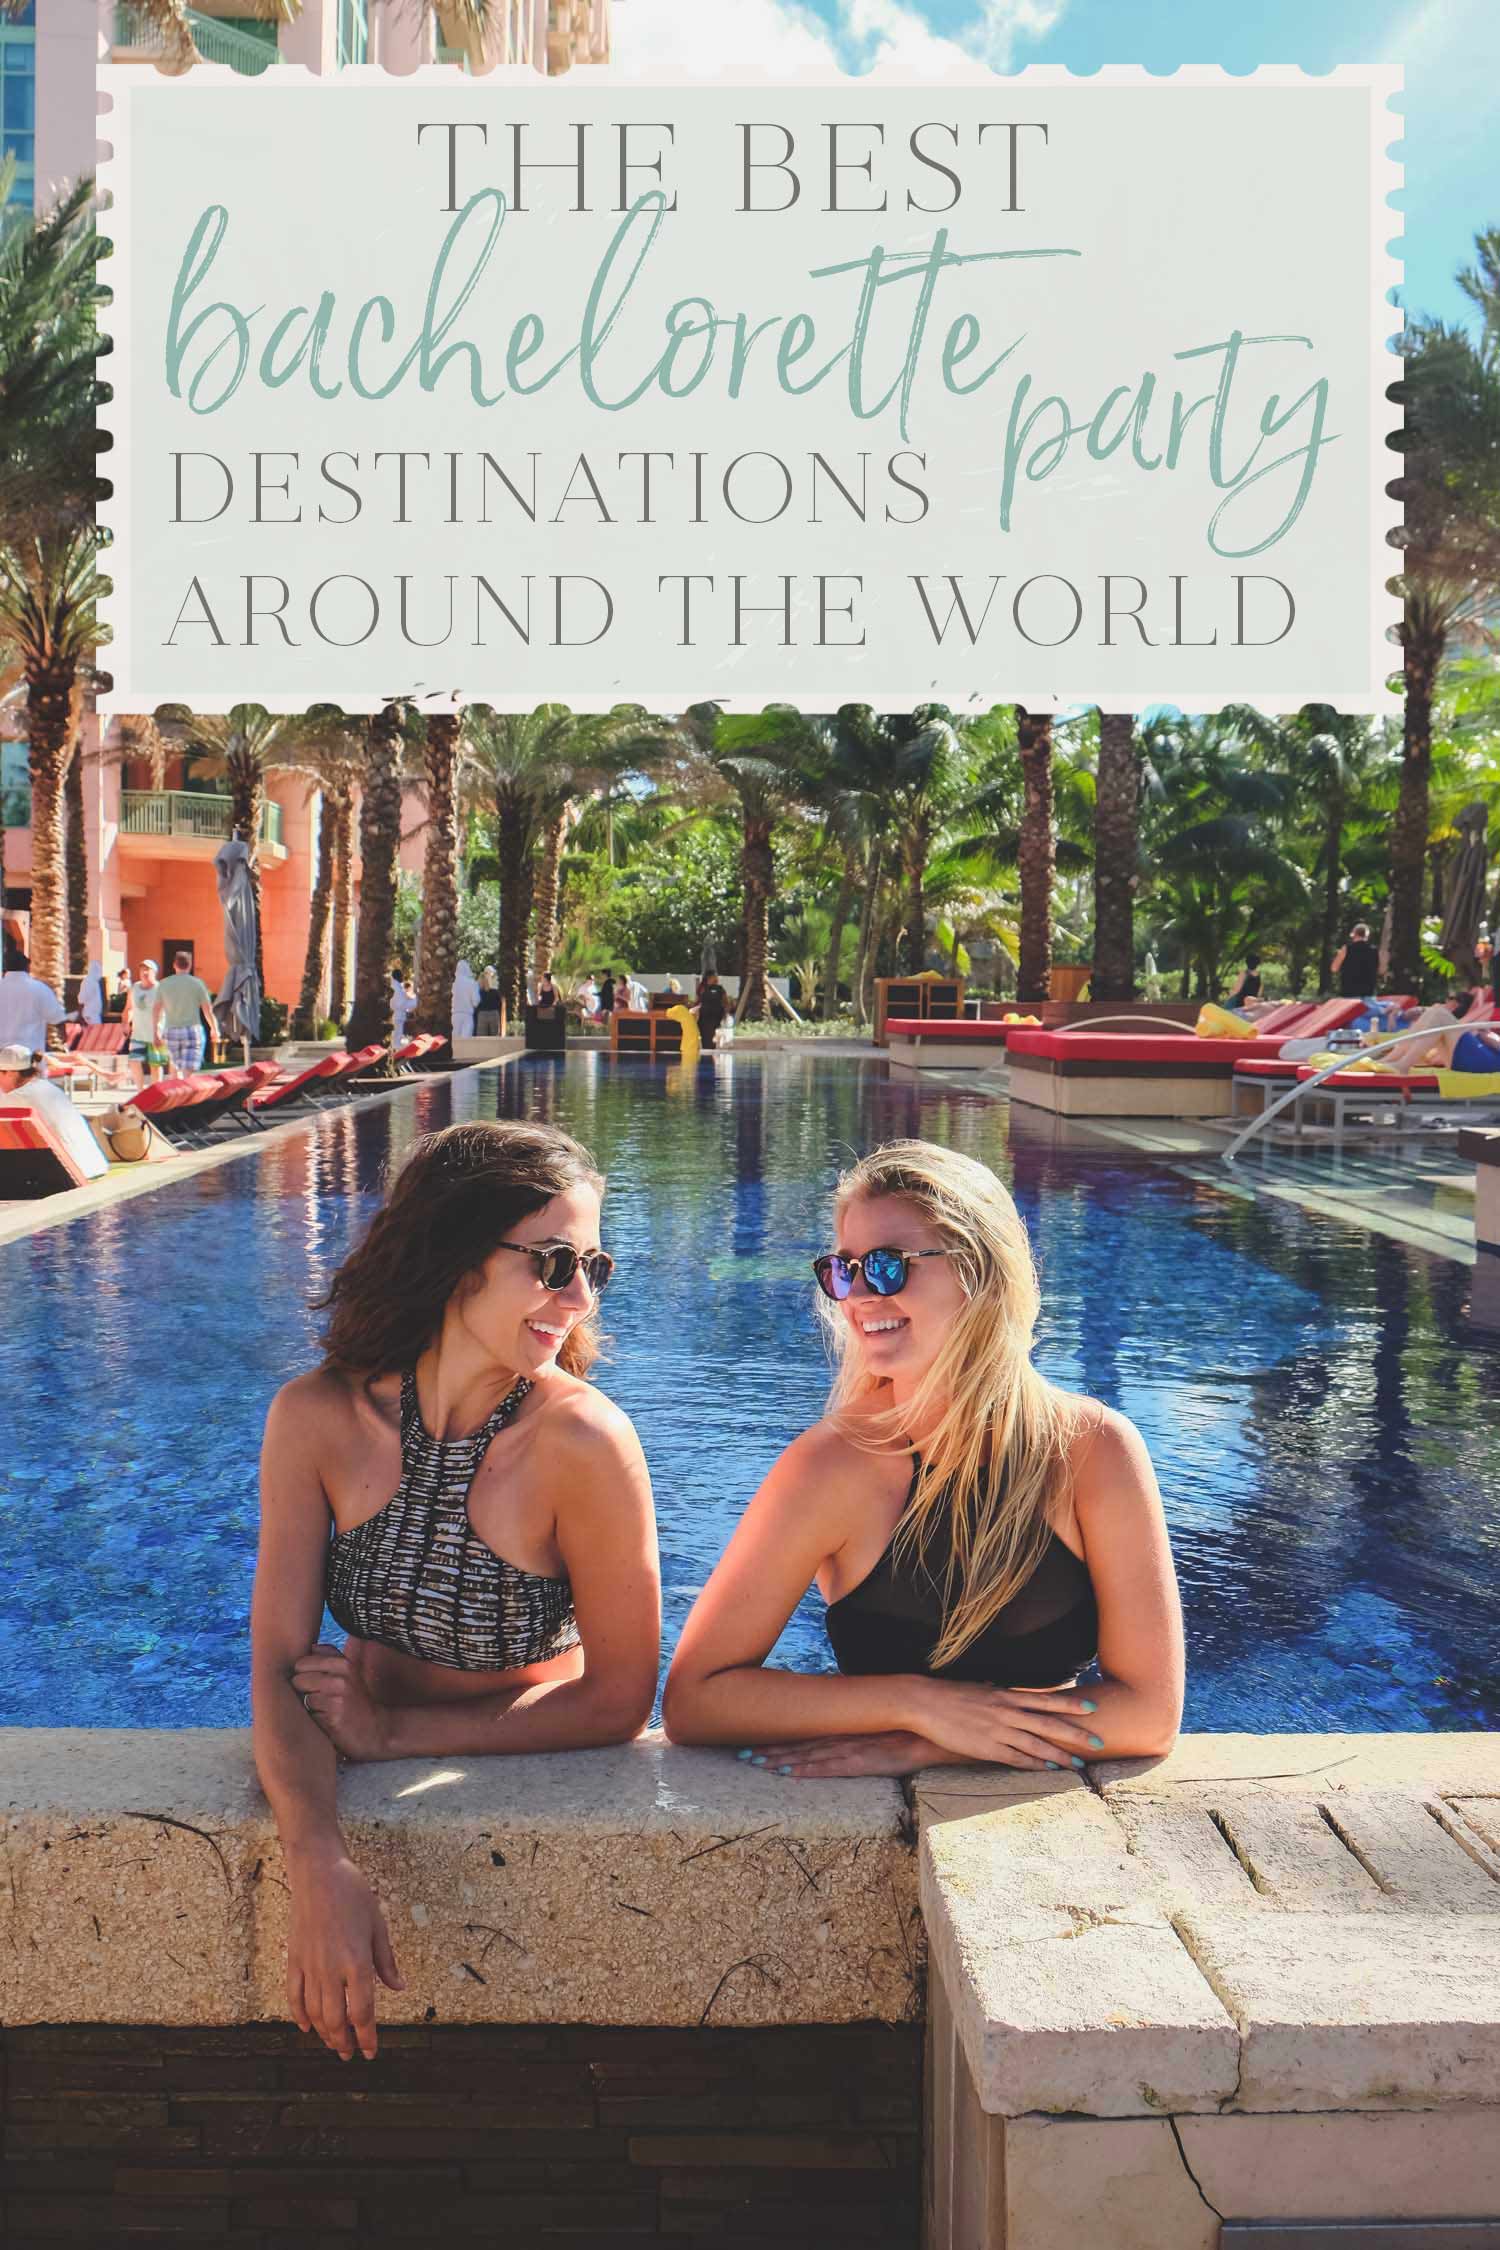 The Best Bachelorette Party Destinations Around the World